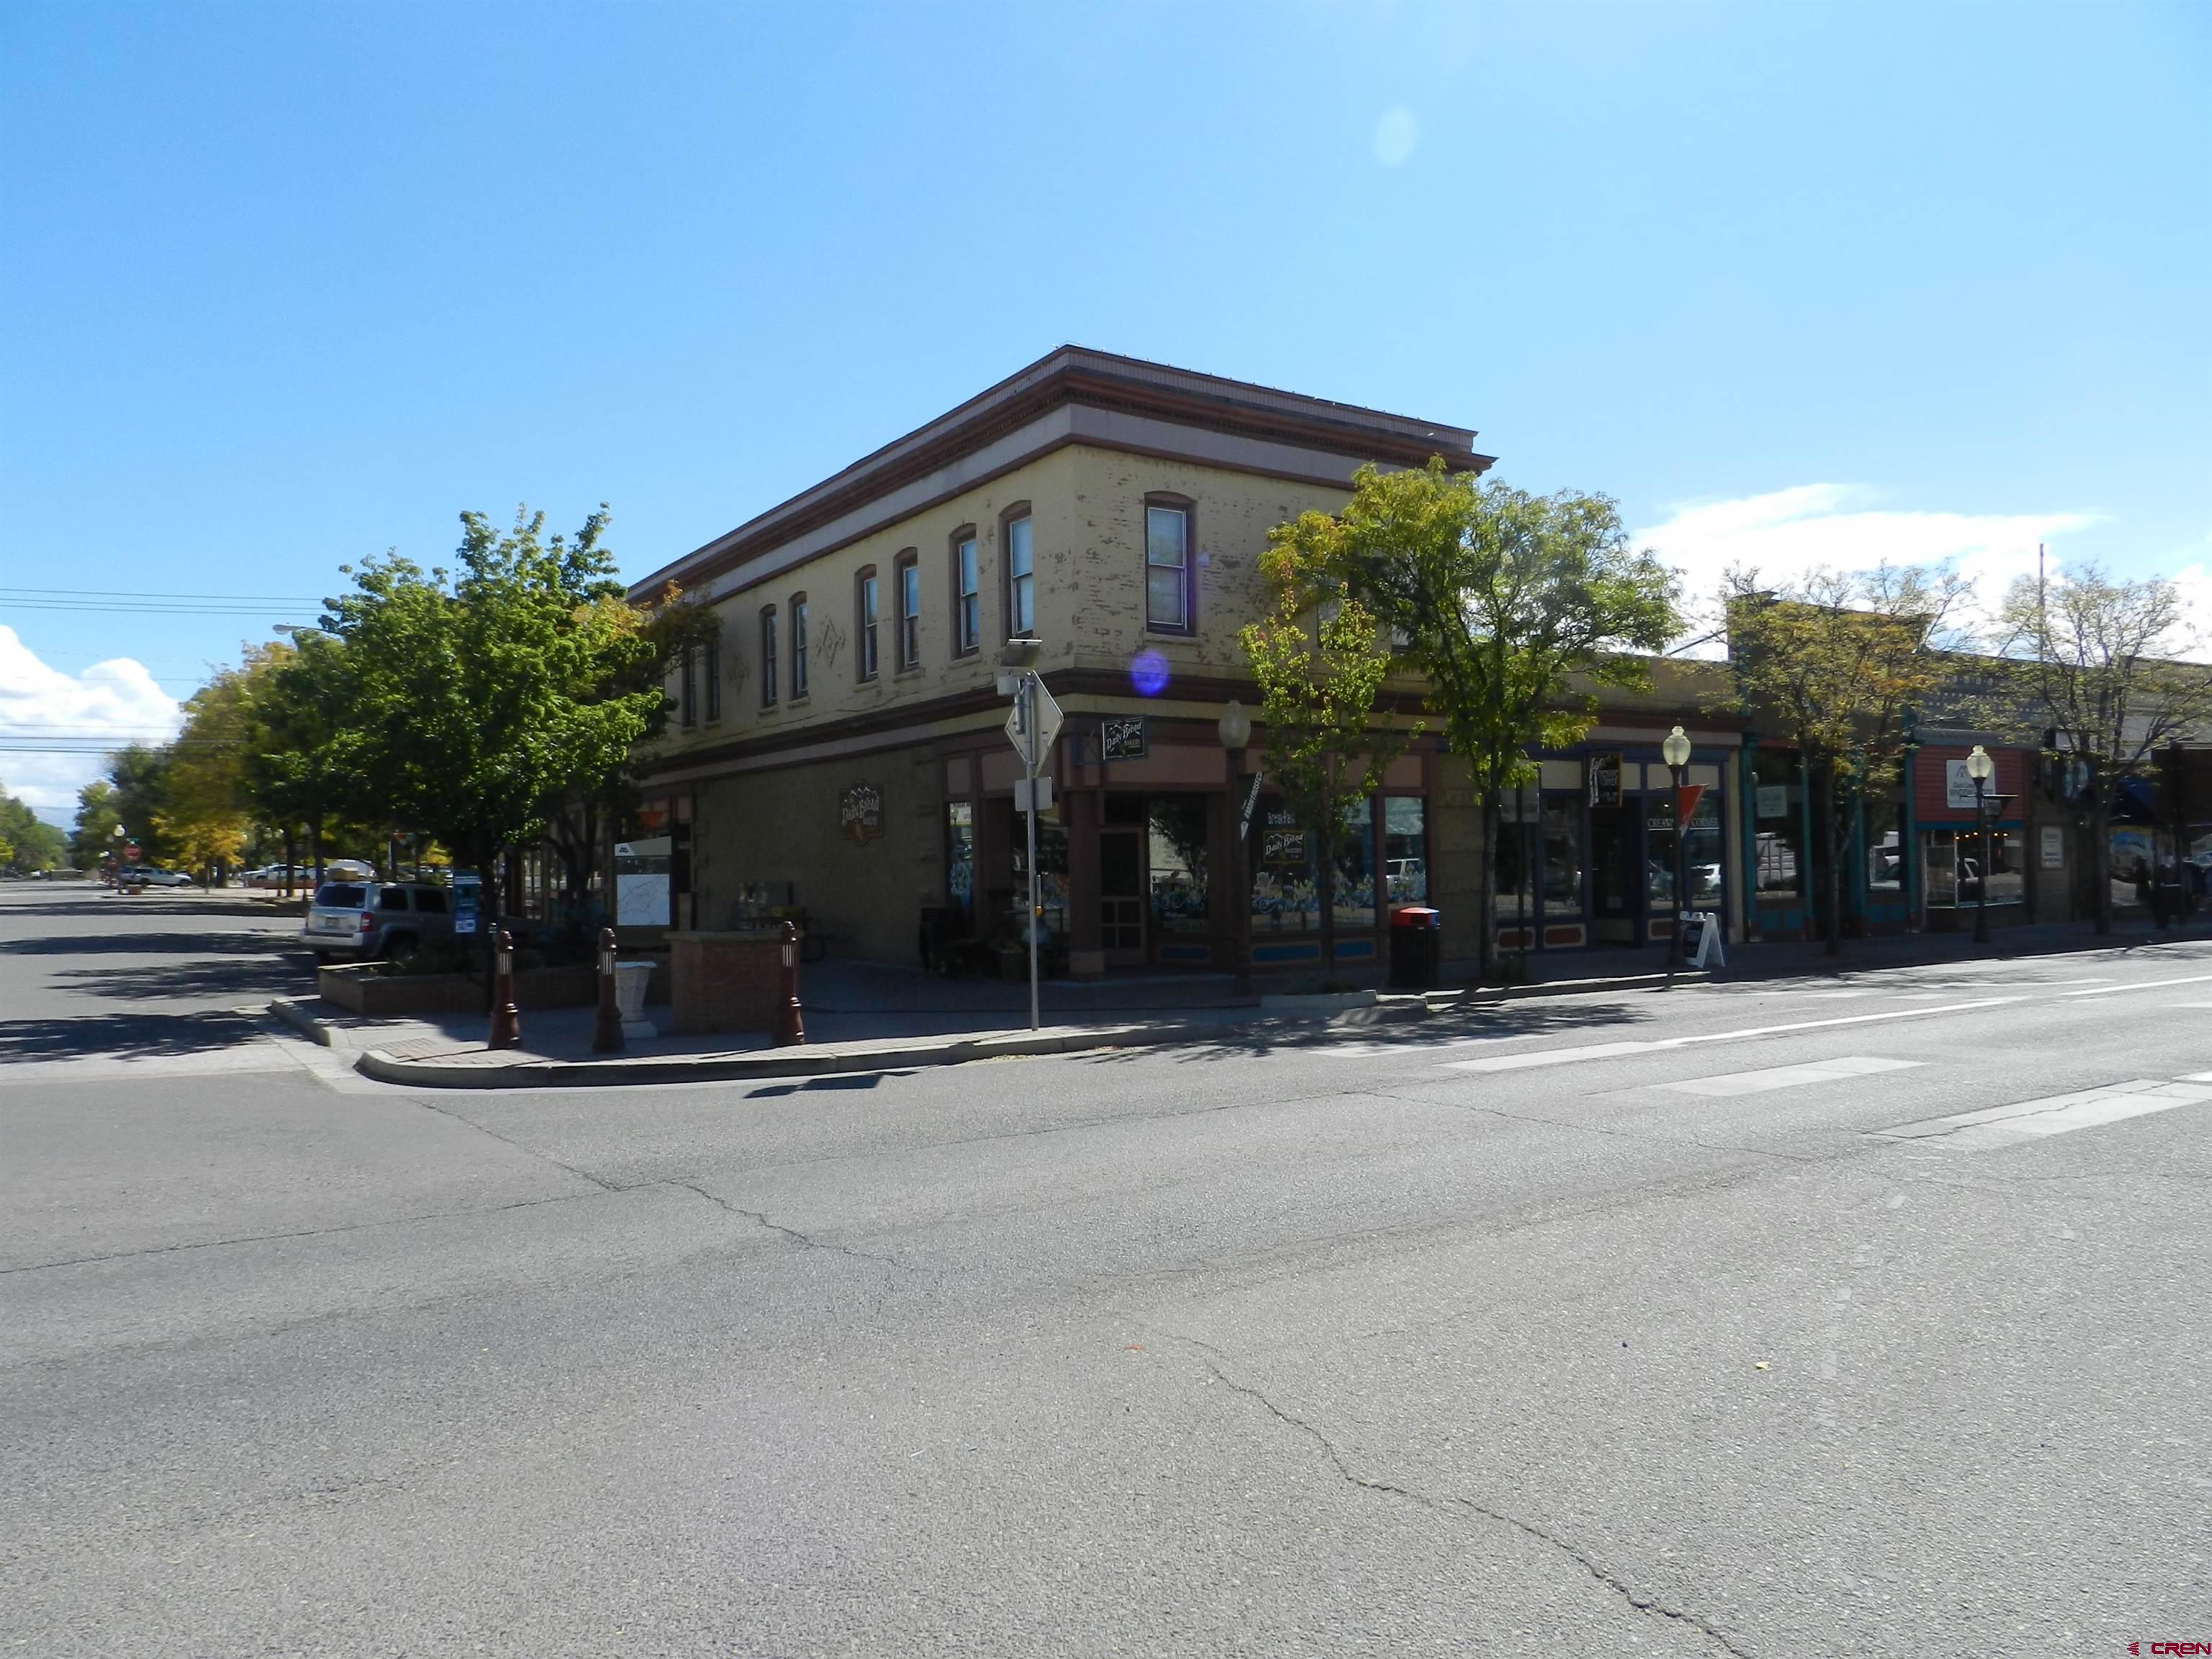 Outstanding Retail/Office Building with Ideal Main St Location!   Prime Commercial Building and Position:   Amazing location, easy access off E Main and S Cascade in the heart of historic downtown Montrose. 6,888 sq.ft. (MOL) building plus additional 3,800 sq.ft. (MOL) basement, was built in 1896 and emphasizes lots of charm from that era. 16, 18 and 20 S Cascade, each have one bathroom per unit and separate entrances. 12 S Cascade is the upper unit and features 6 office spaces, 2 bathrooms, entire floor is vacant and ready to be leased. 344 & 346 E Main St have separate entrances, ample floor space and both units share 2 ADA bathrooms, plus full basements under each unit. Zoned B-1 allows for many uses including retail, business or professional offices, restaurant, dance studio, art center or childcare facility. Great investment opportunity! Take advantage of this ideal location and space!